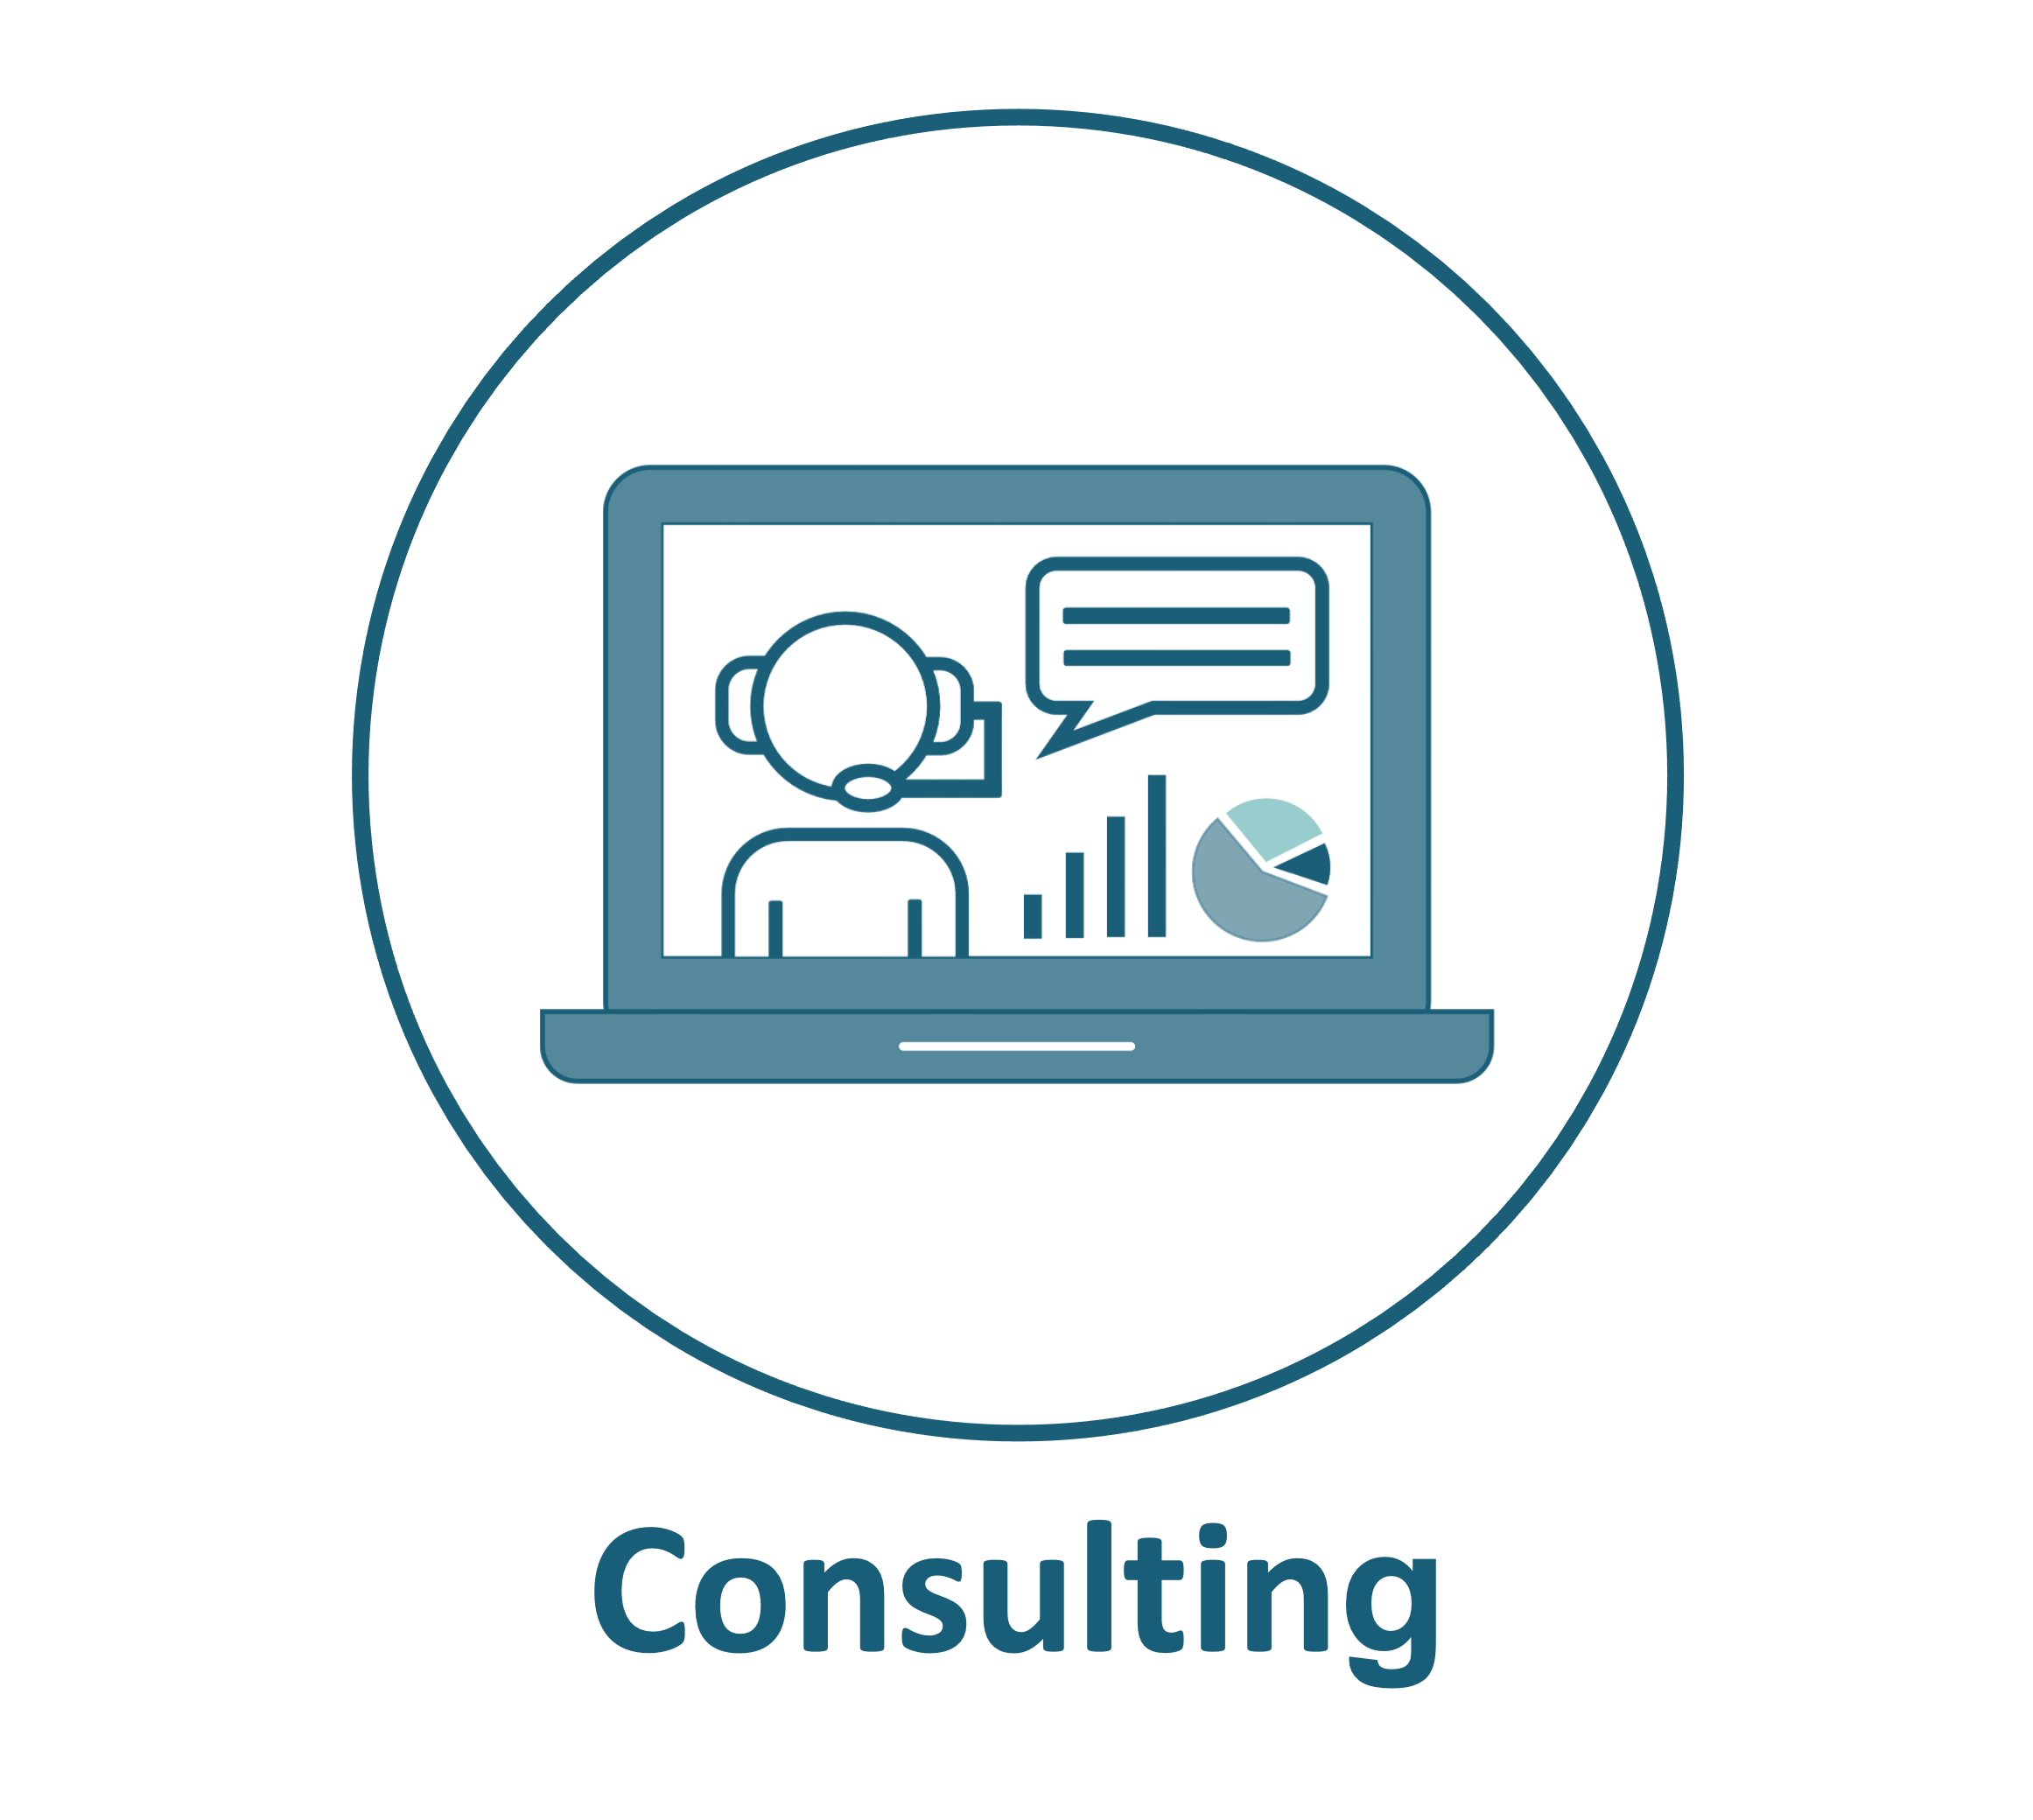 Consulting service